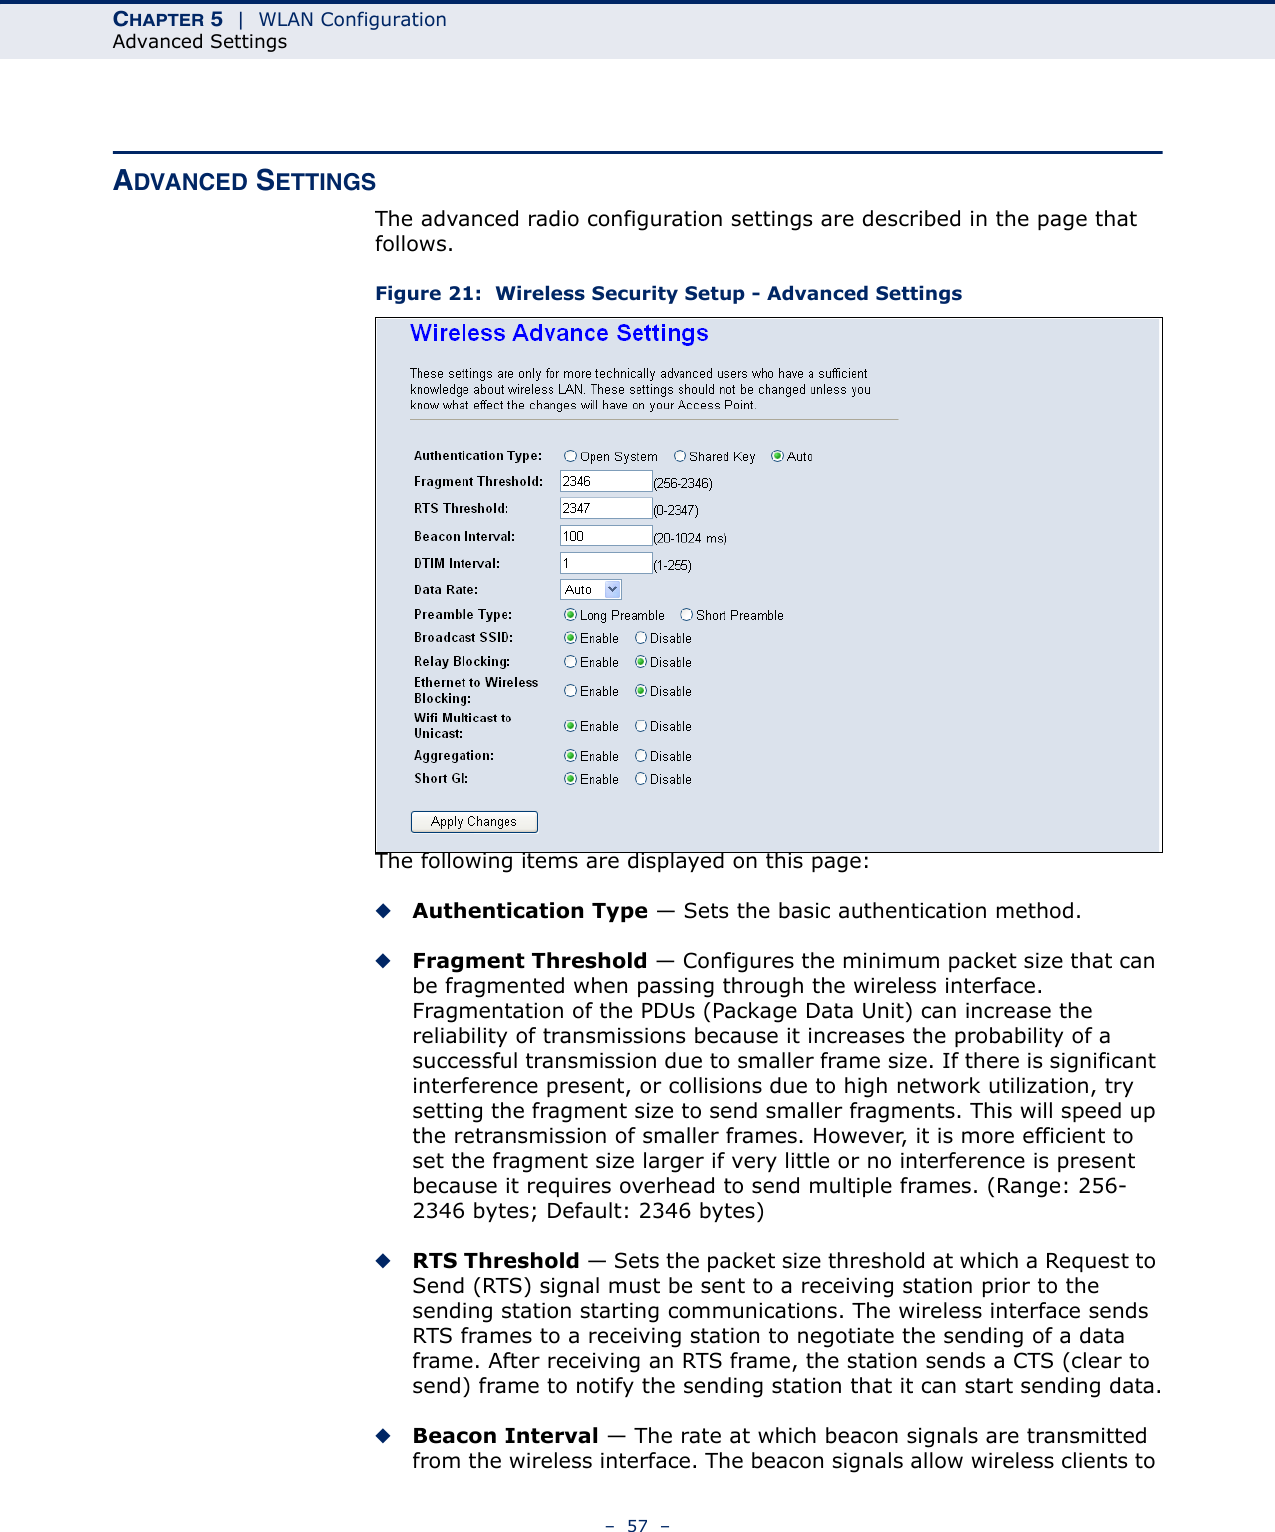 CHAPTER 5  |  WLAN ConfigurationAdvanced Settings–  57  –ADVANCED SETTINGSThe advanced radio configuration settings are described in the page that follows.Figure 21:  Wireless Security Setup - Advanced SettingsThe following items are displayed on this page:◆Authentication Type — Sets the basic authentication method.◆Fragment Threshold — Configures the minimum packet size that can be fragmented when passing through the wireless interface. Fragmentation of the PDUs (Package Data Unit) can increase the reliability of transmissions because it increases the probability of a successful transmission due to smaller frame size. If there is significant interference present, or collisions due to high network utilization, try setting the fragment size to send smaller fragments. This will speed up the retransmission of smaller frames. However, it is more efficient to set the fragment size larger if very little or no interference is present because it requires overhead to send multiple frames. (Range: 256-2346 bytes; Default: 2346 bytes)◆RTS Threshold — Sets the packet size threshold at which a Request to Send (RTS) signal must be sent to a receiving station prior to the sending station starting communications. The wireless interface sends RTS frames to a receiving station to negotiate the sending of a data frame. After receiving an RTS frame, the station sends a CTS (clear to send) frame to notify the sending station that it can start sending data.◆Beacon Interval — The rate at which beacon signals are transmitted from the wireless interface. The beacon signals allow wireless clients to 